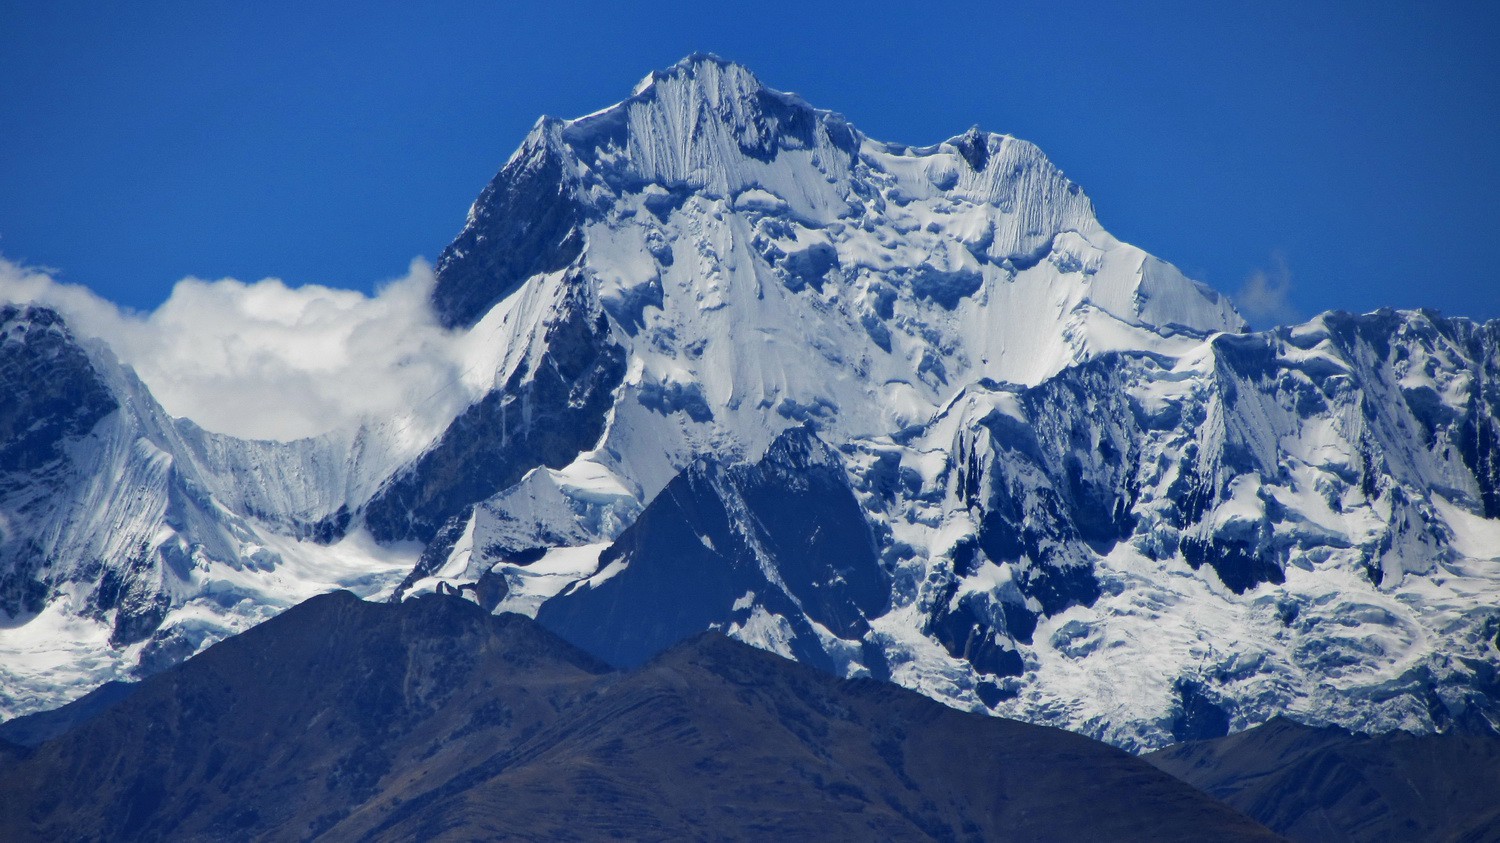 West face of Nevado Yerupaja, which is with 6617 meters sea-level the second highest mountain in Peru